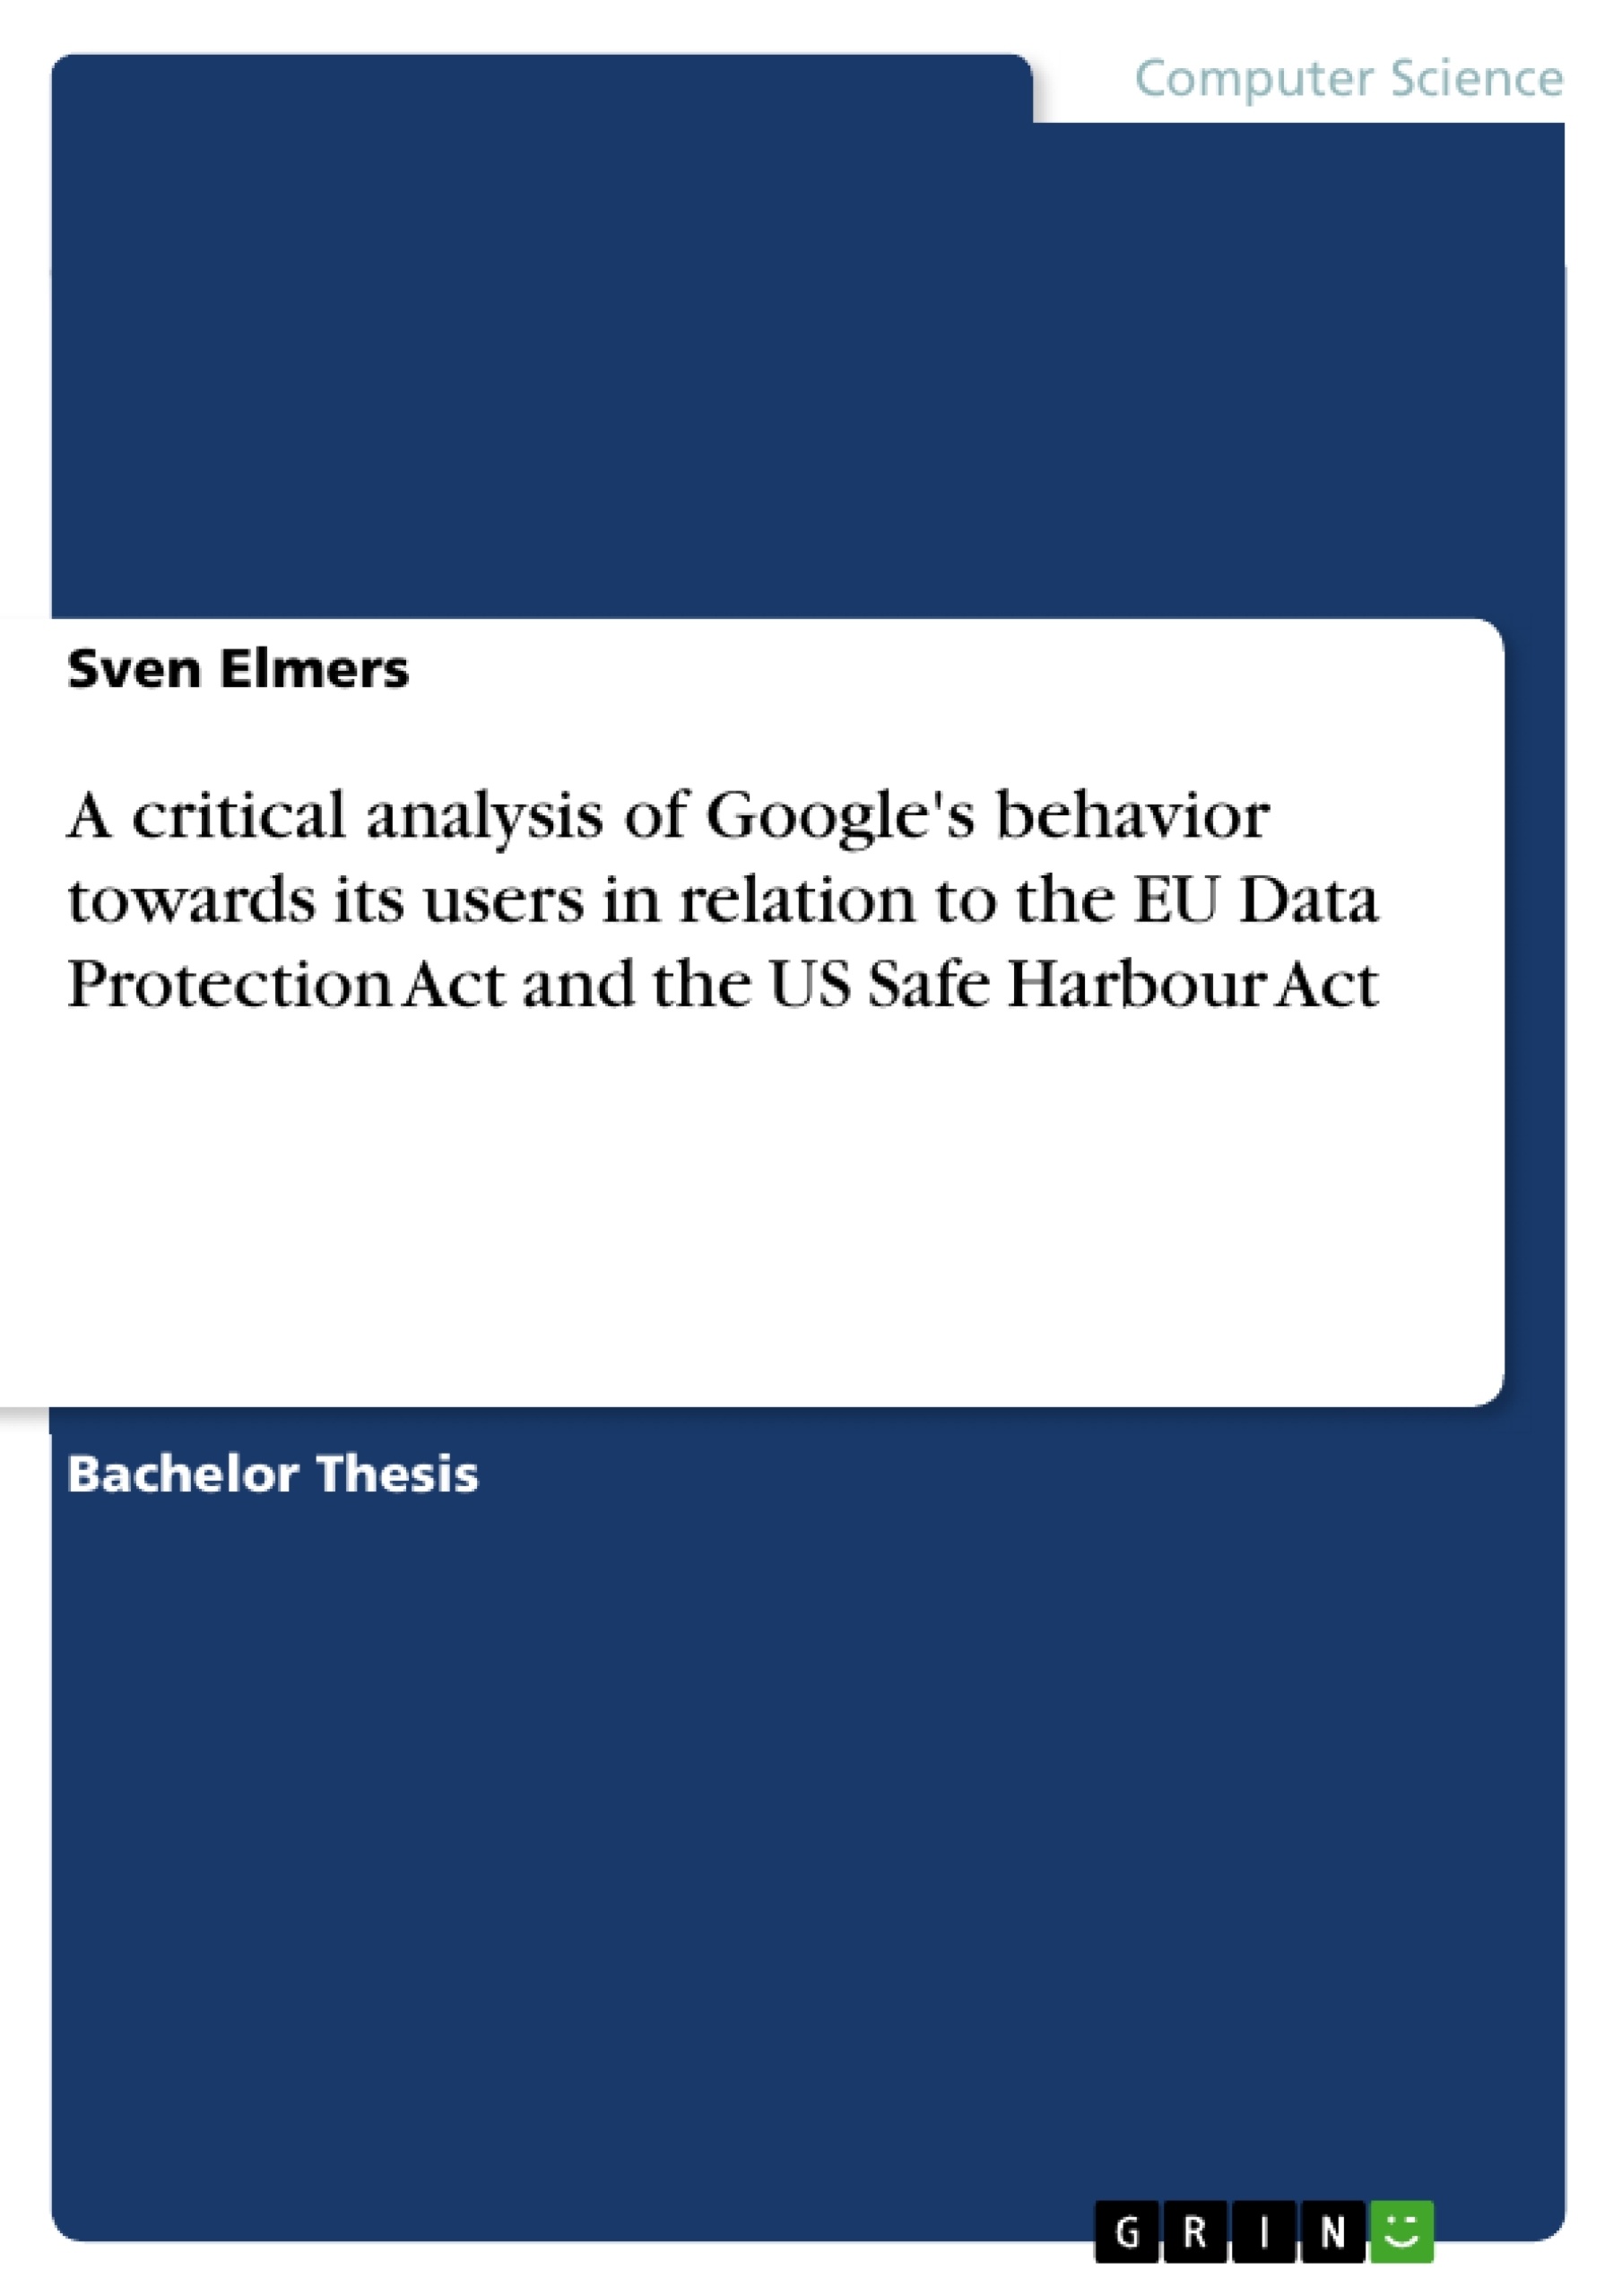 Titre: A critical analysis of Google's behavior towards its users in relation to the EU Data Protection Act and the US Safe Harbour Act